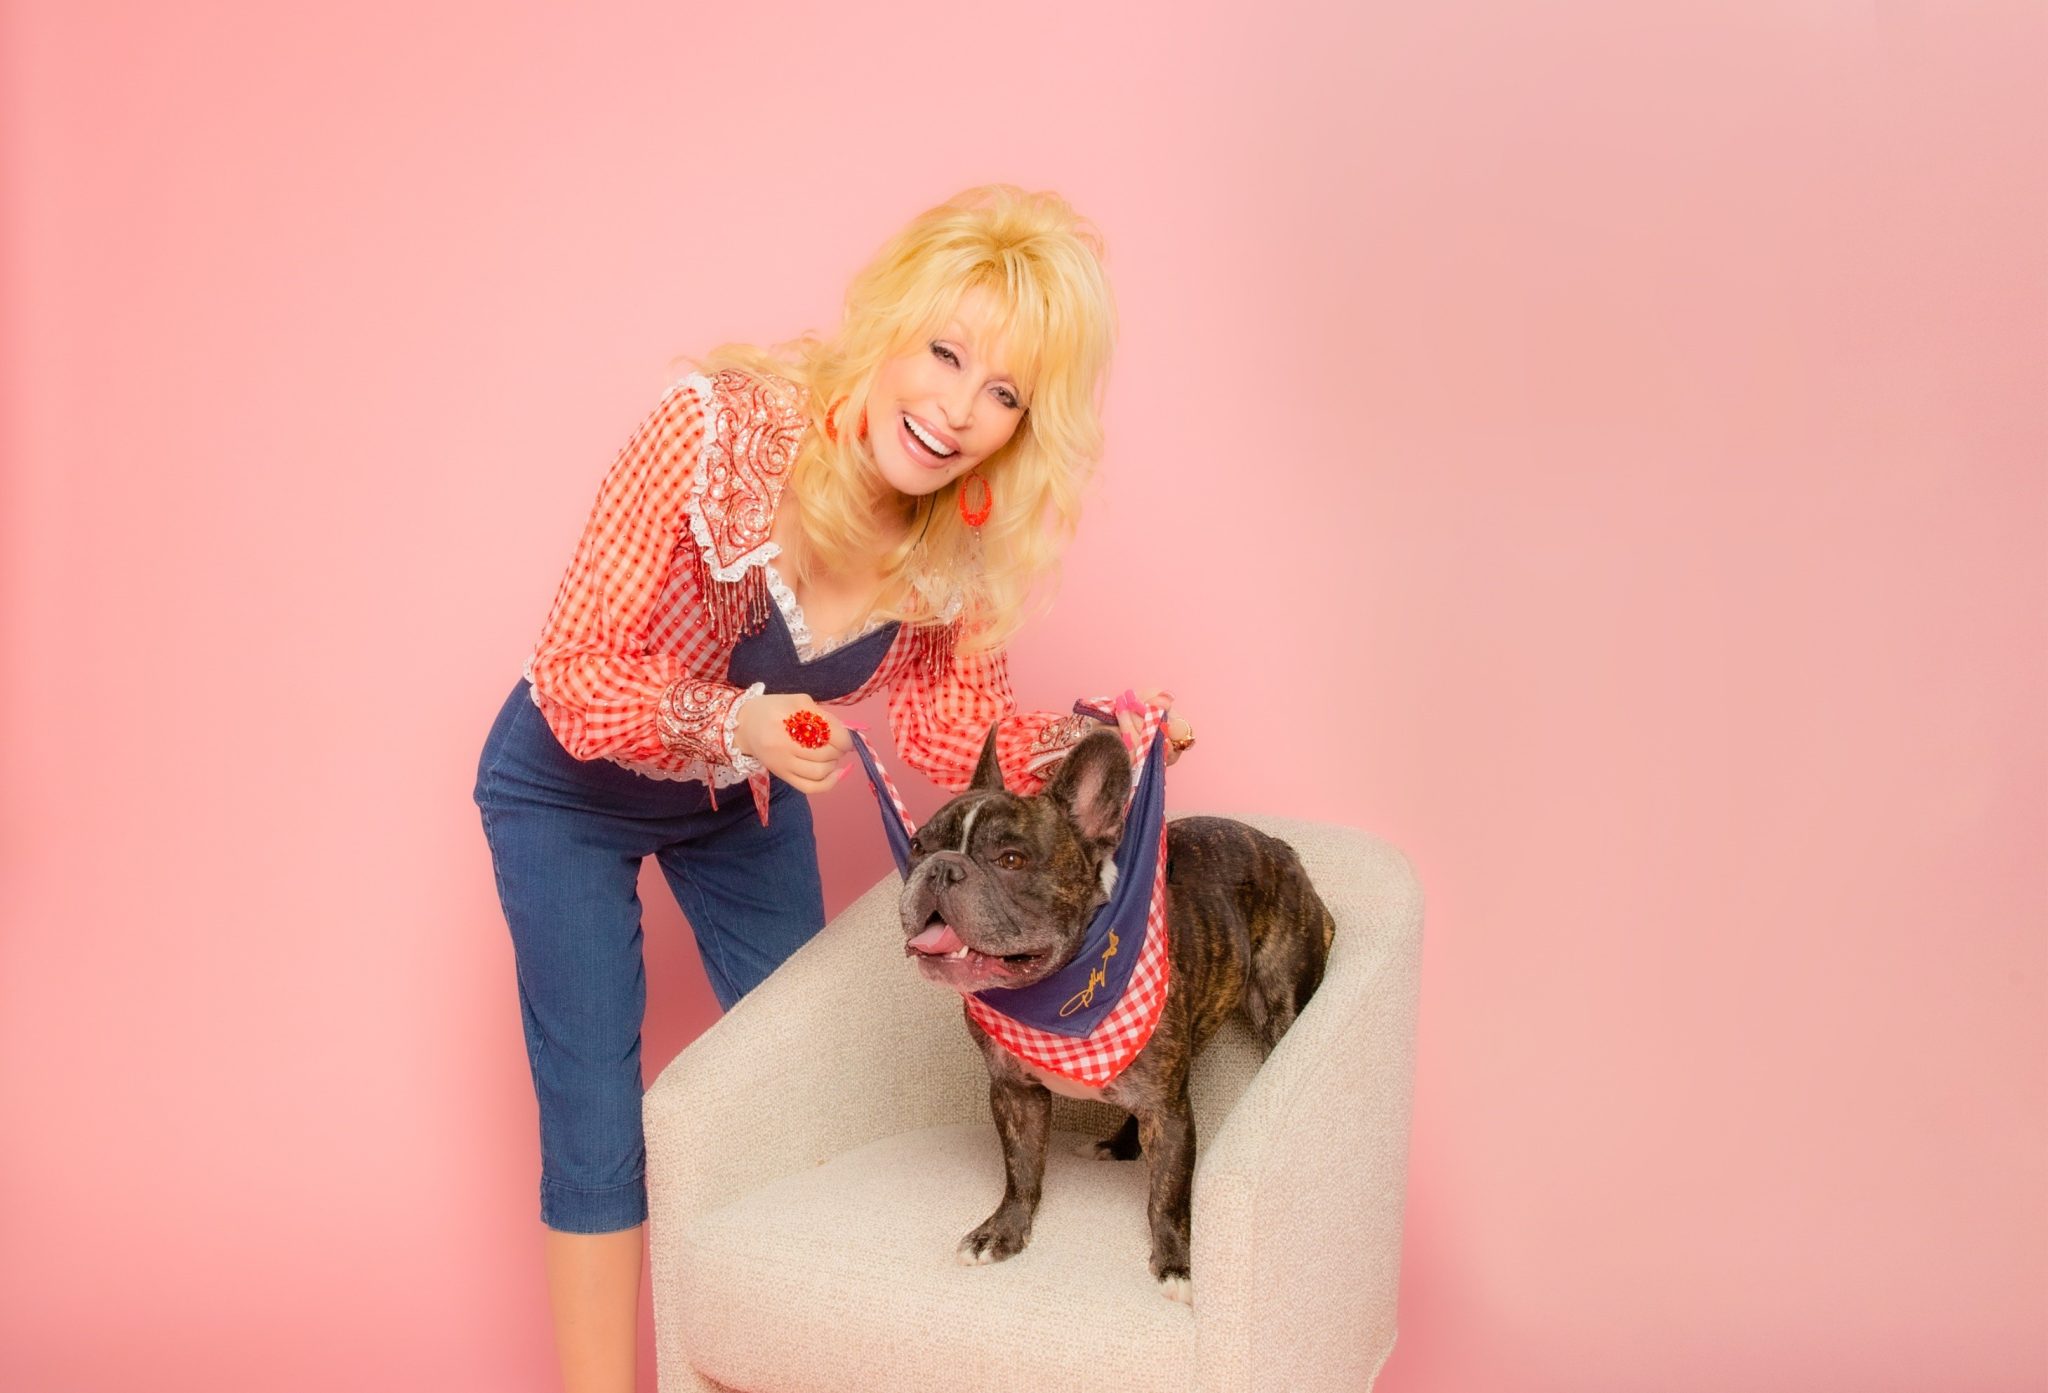 Dolly Parton with a French bulldog on a pink backdrop